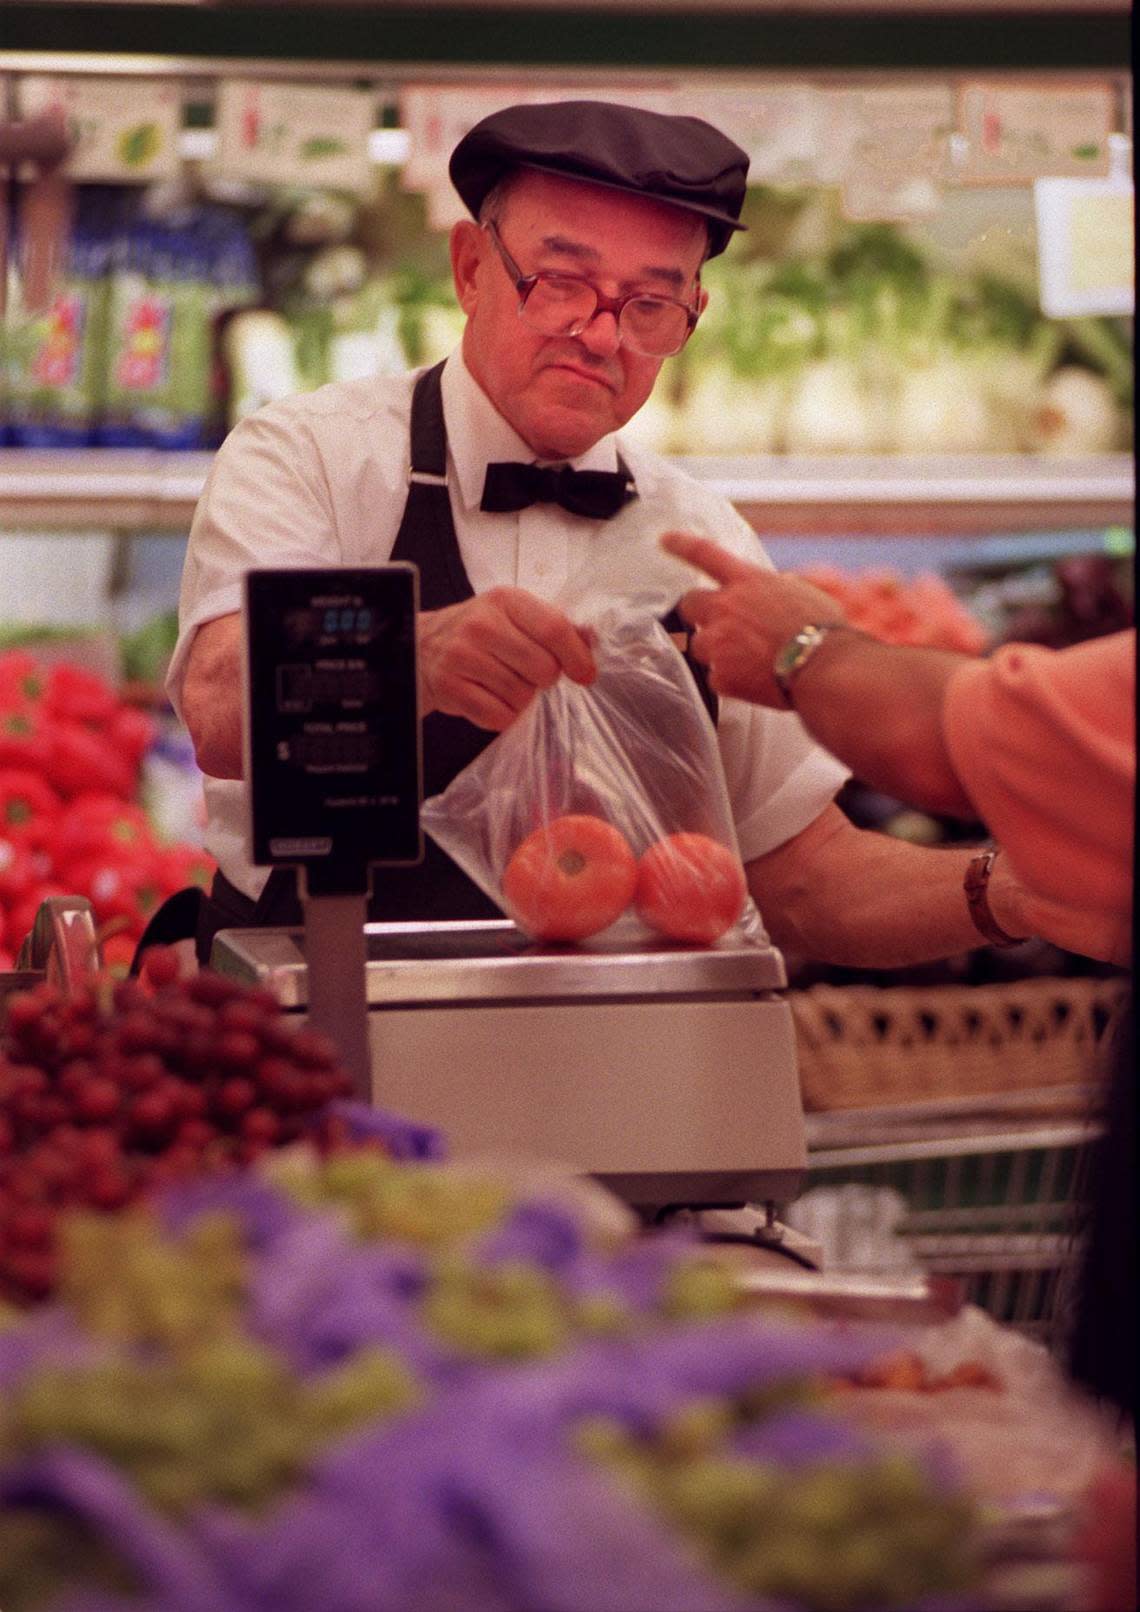 Epicure employee Alberto Serpa weighs tomatoes for a customer. Candace Barbot/Miami Herald File/1998